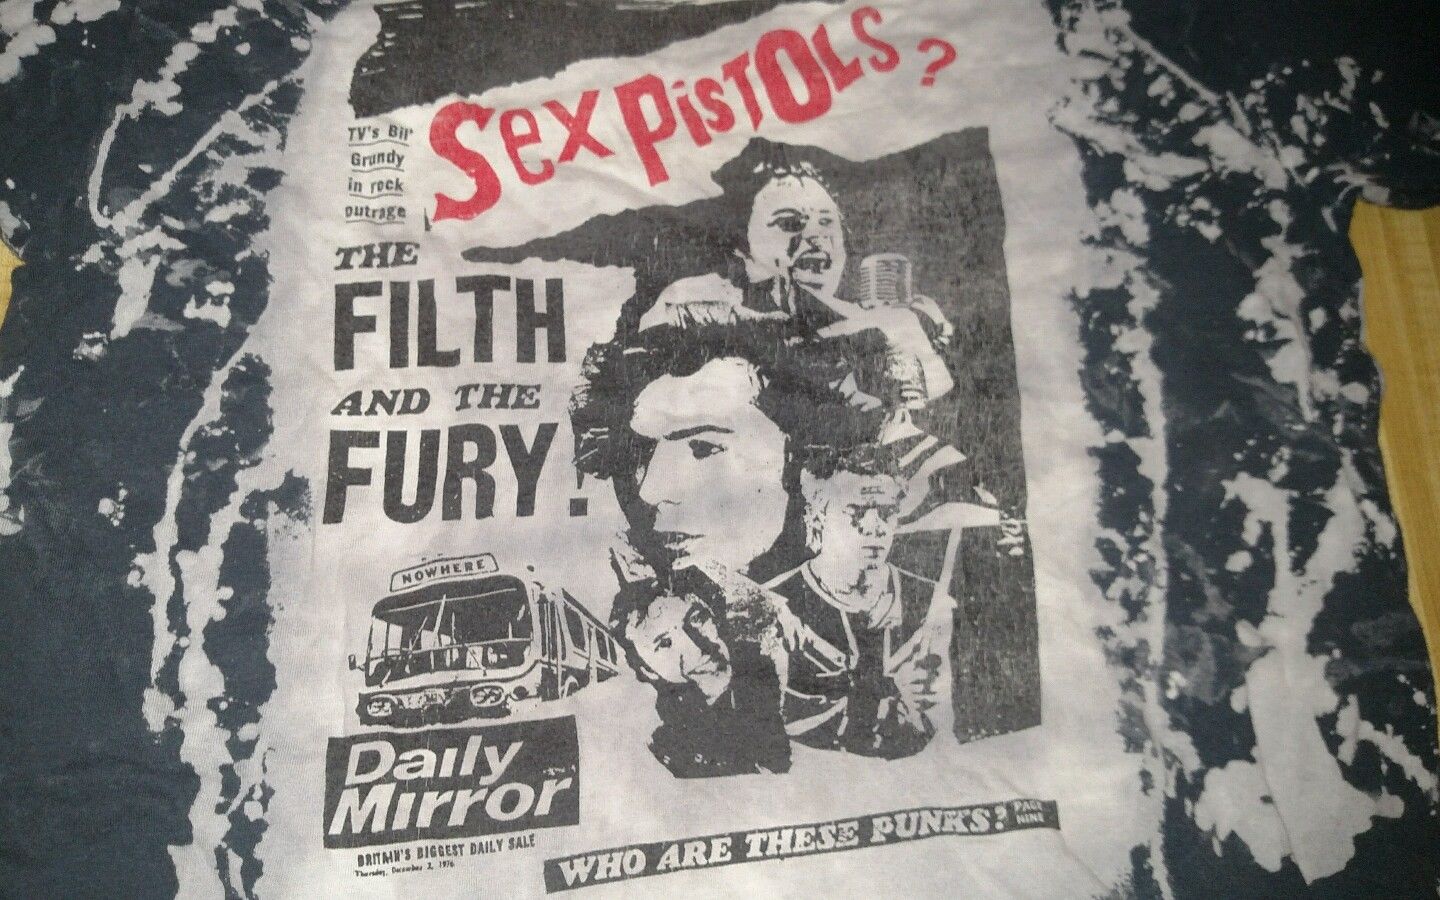 The Filth The Fury Sex Pistols